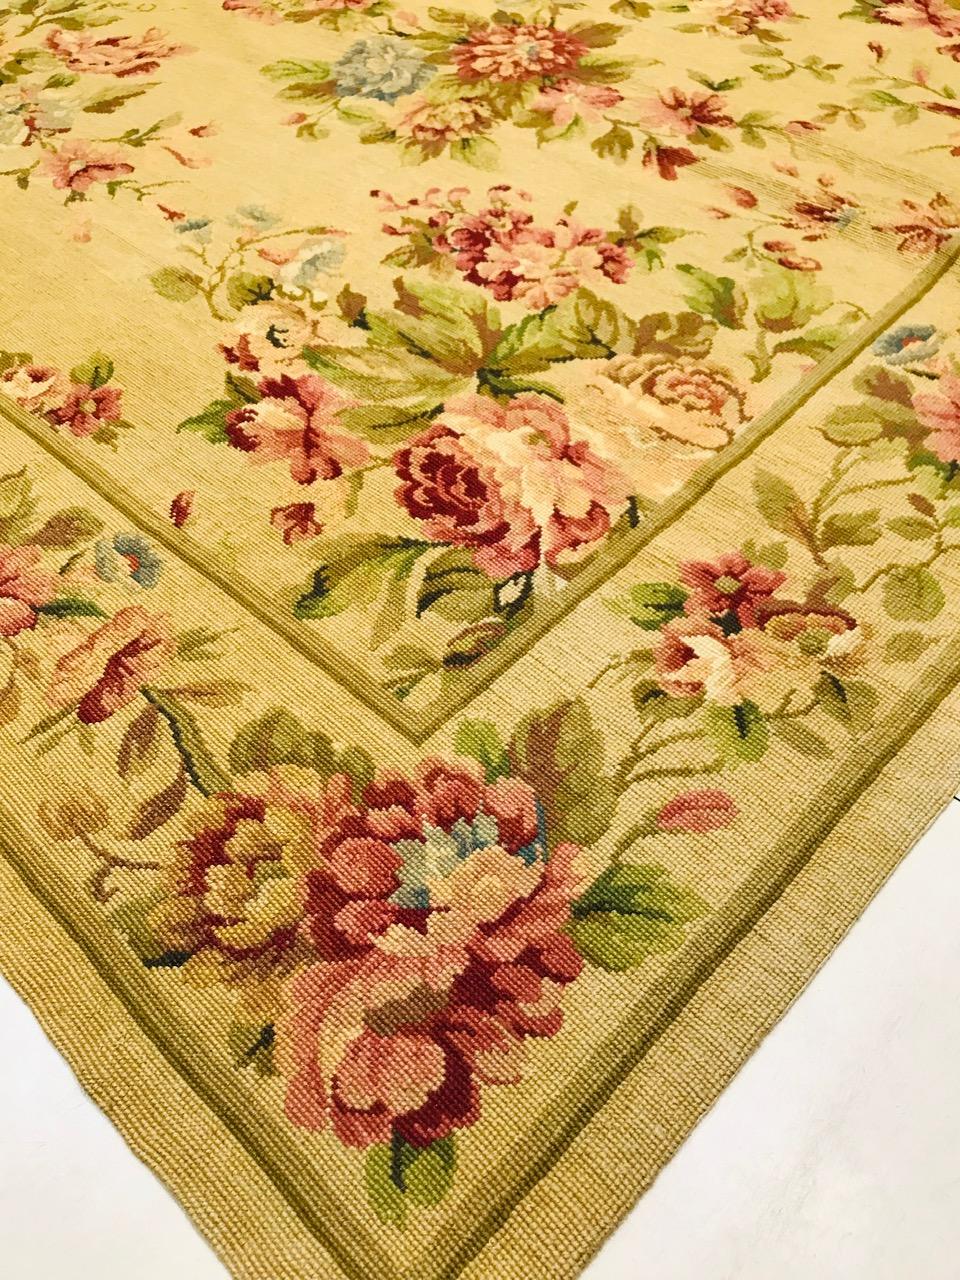 1970 Olive Green and Beige Petit Point Rug Hand Knotted in Wool with Flowers For Sale 7